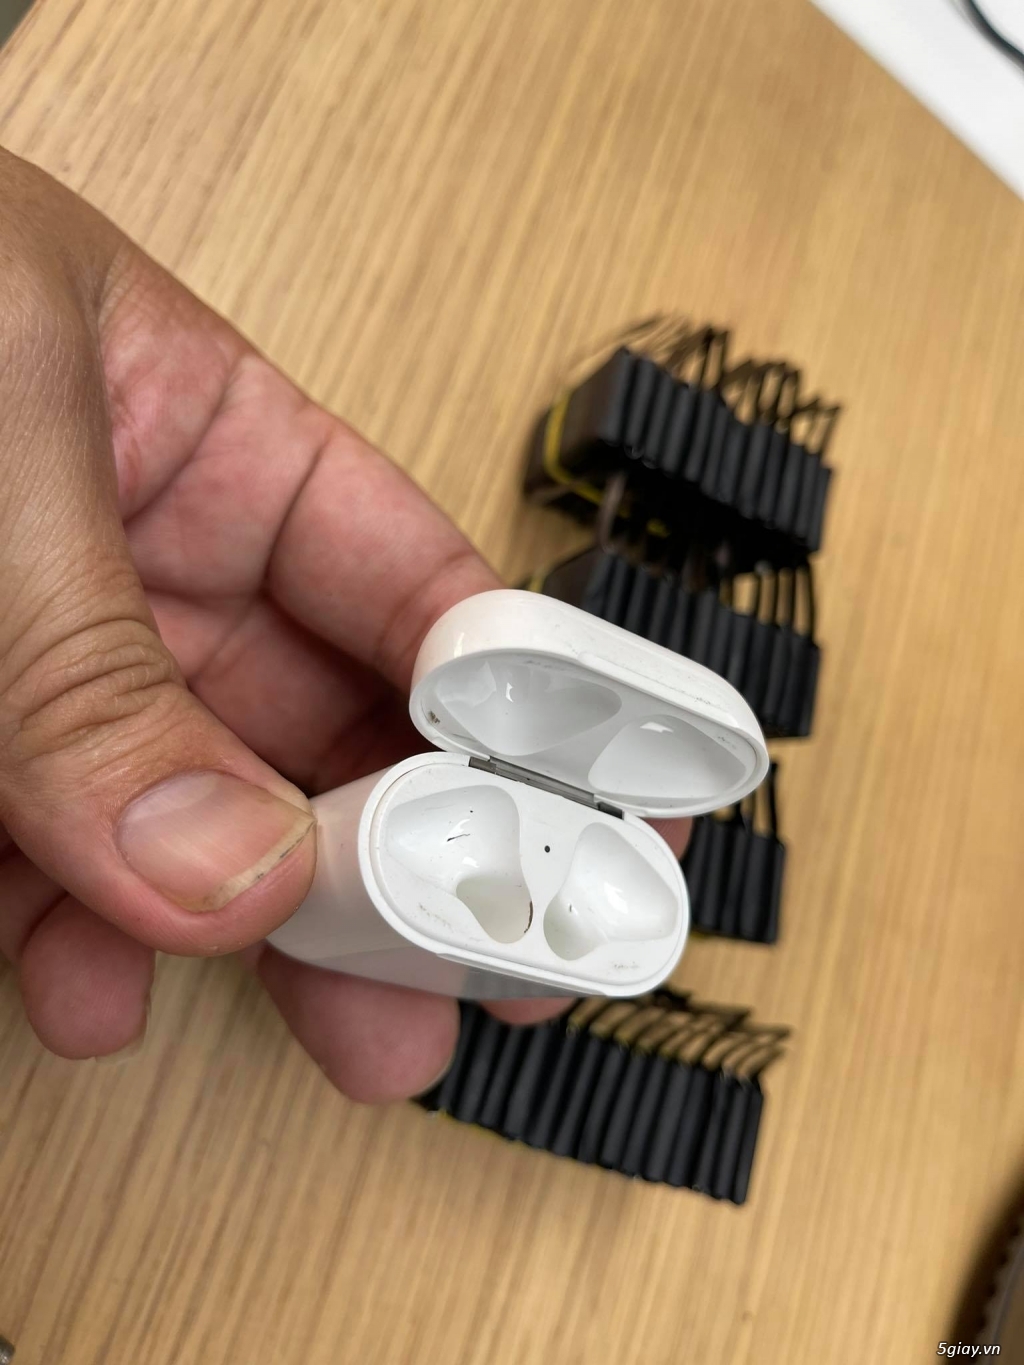 Thay pin dock sạc Airpods 1 - Airpods 2